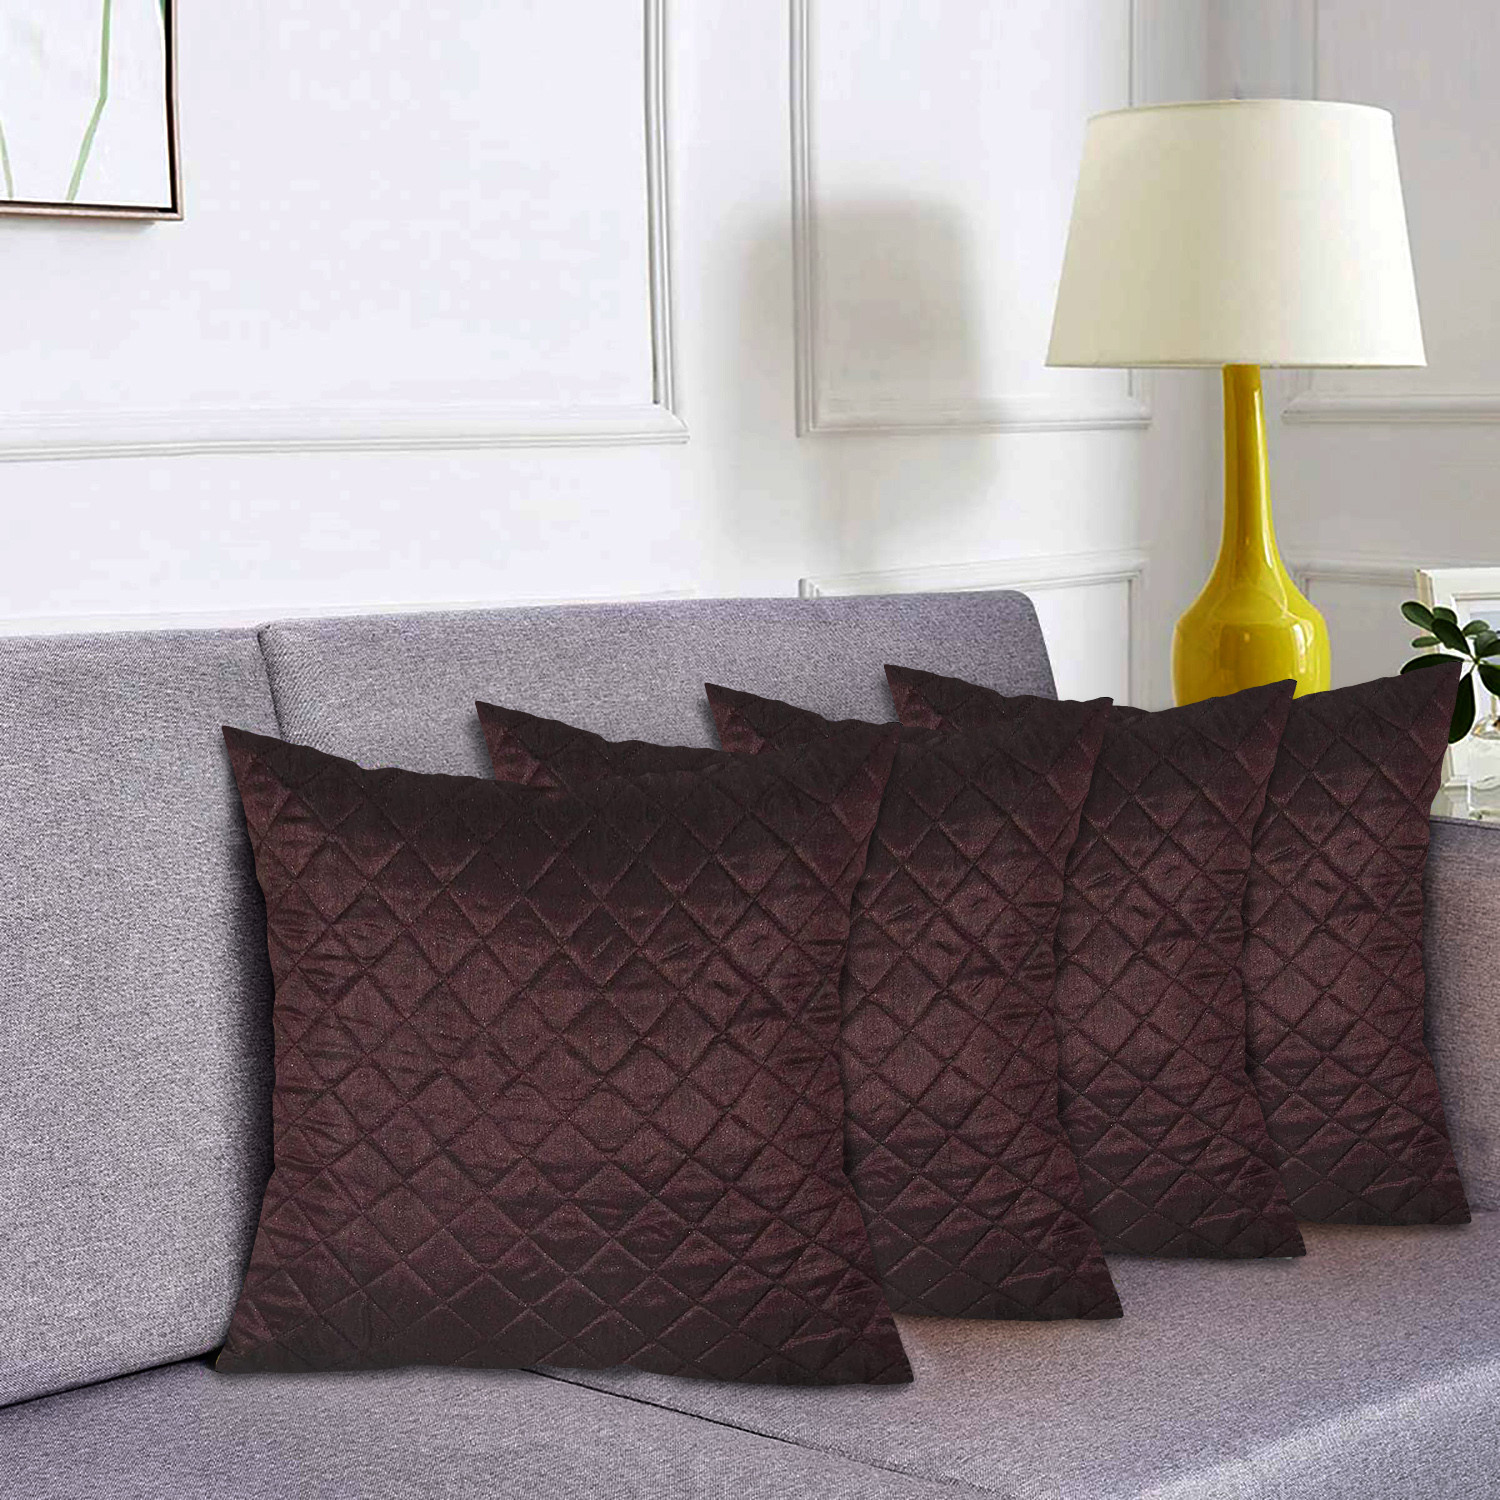 Kuber Industries Soft Decorative Square Quilting Cushion Cover, Cushion Case For Sofa Couch Bed 18x16 Inch-(Brown)